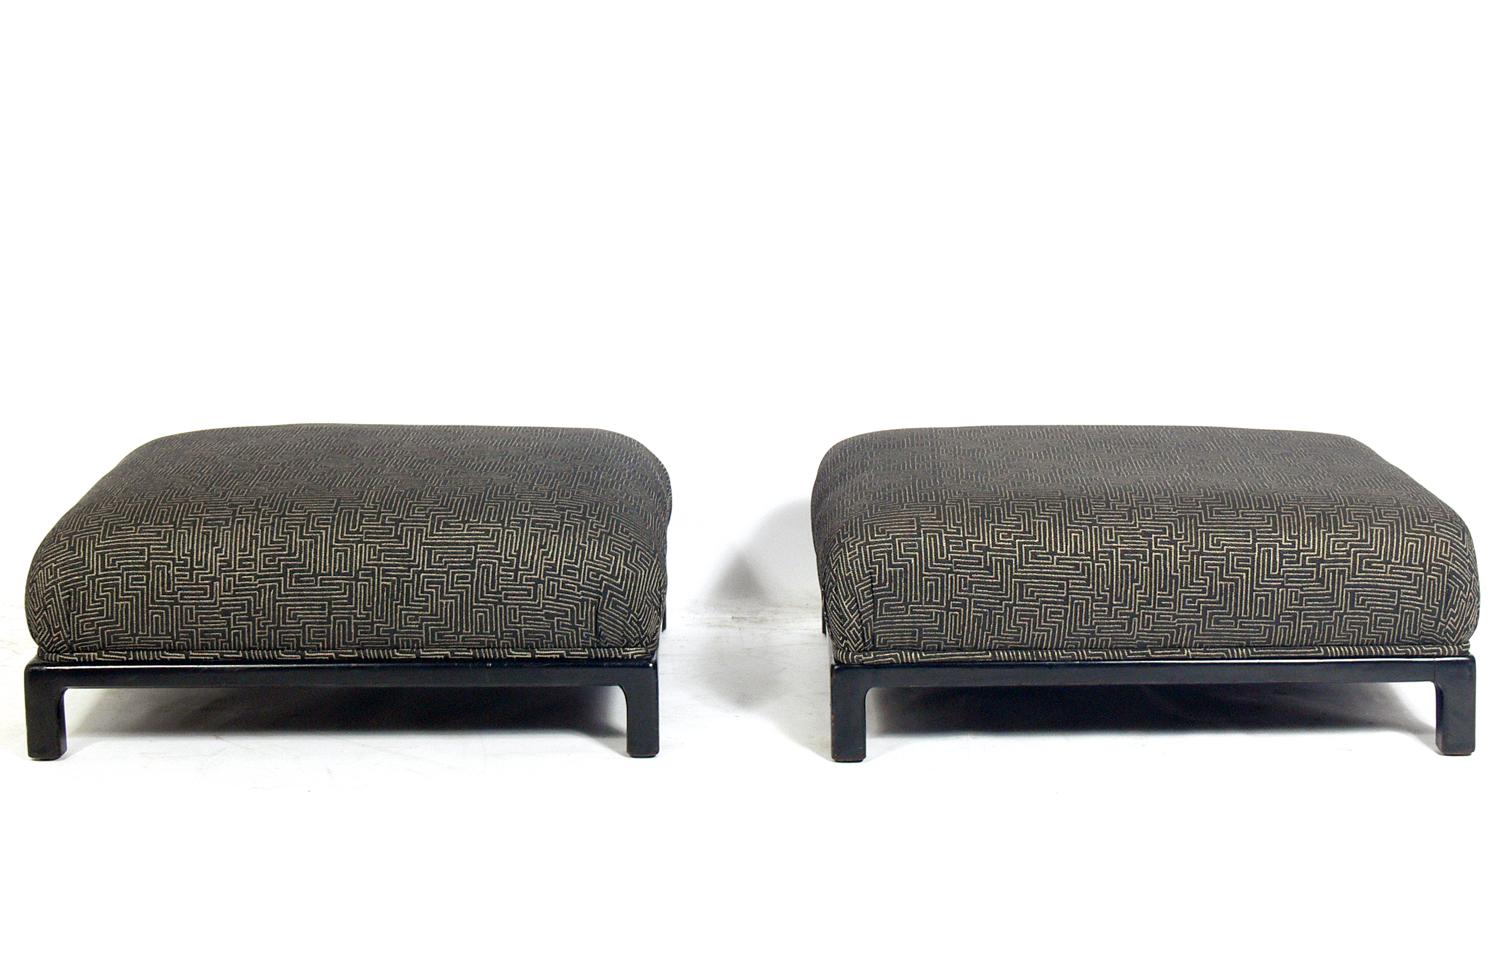 Low slung Asian inspired midcentury stools, American, circa 1950s. These pieces were probably reupholstered in their Asian style geometric fabric within the past few years. Black lacquered bases appears to be the original finish.